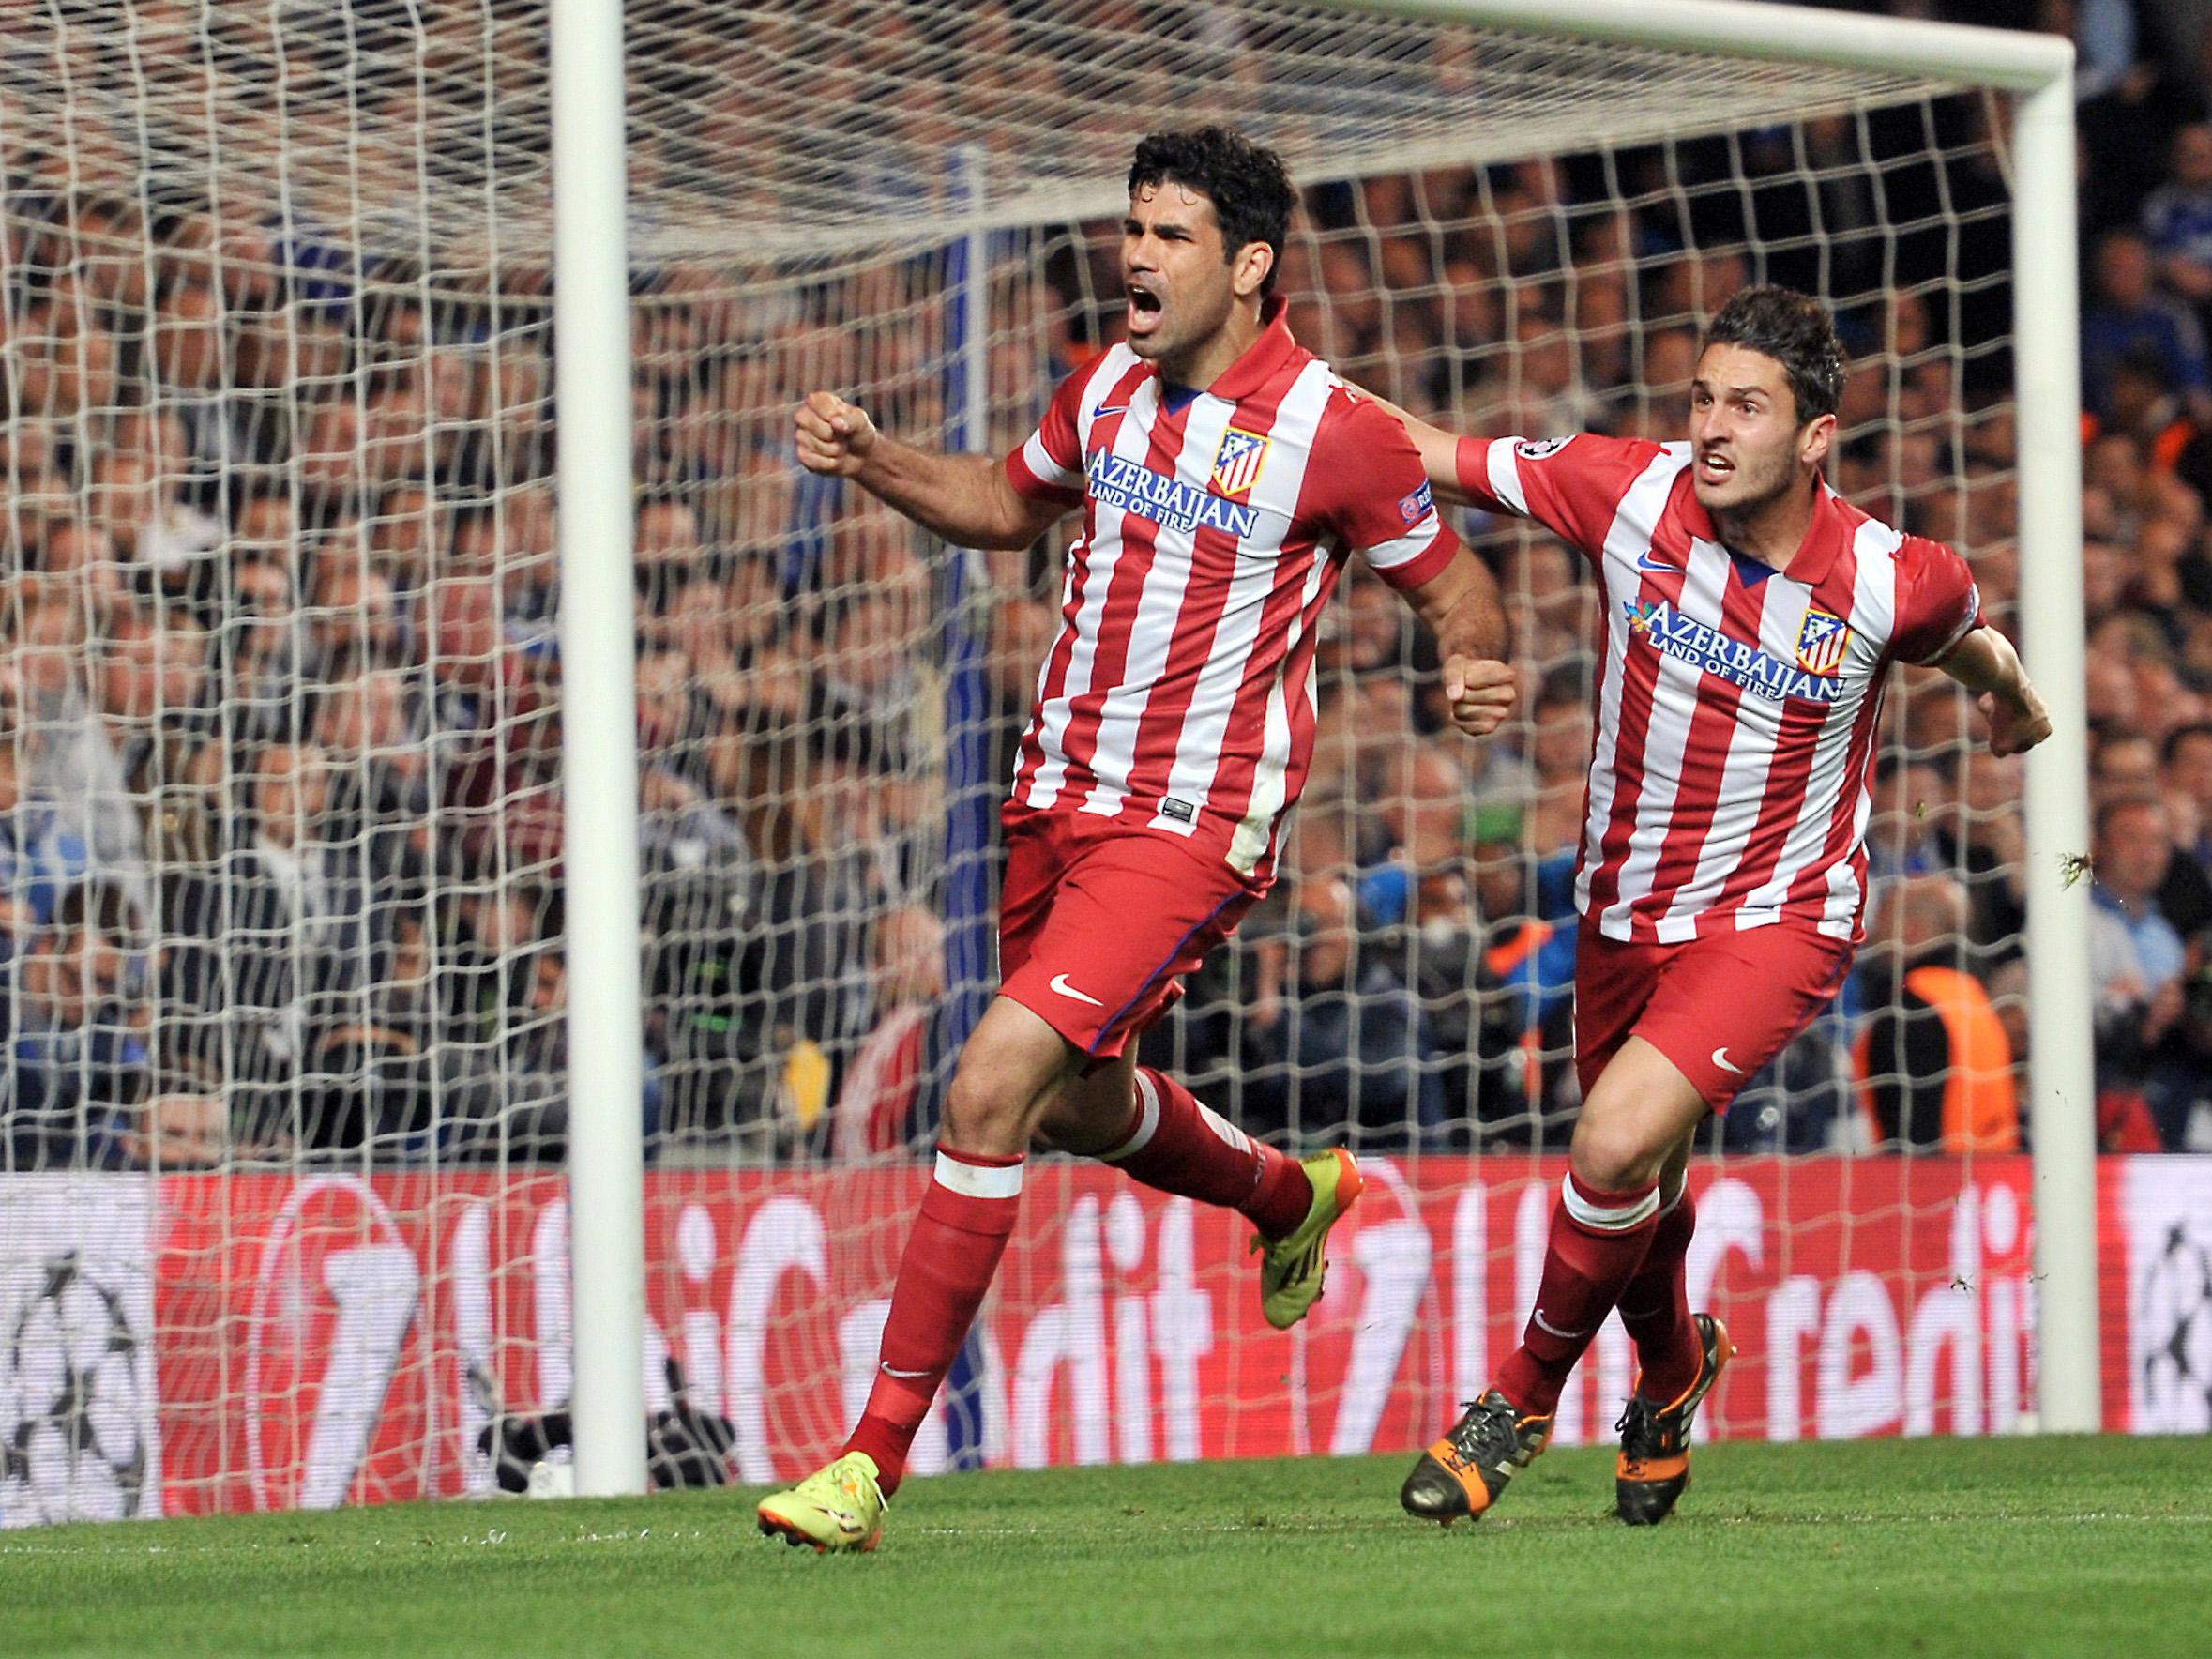 Diego Costa celebrates scoring for Atletico Madrid against Chelsea in 2014, with former teammate Koke